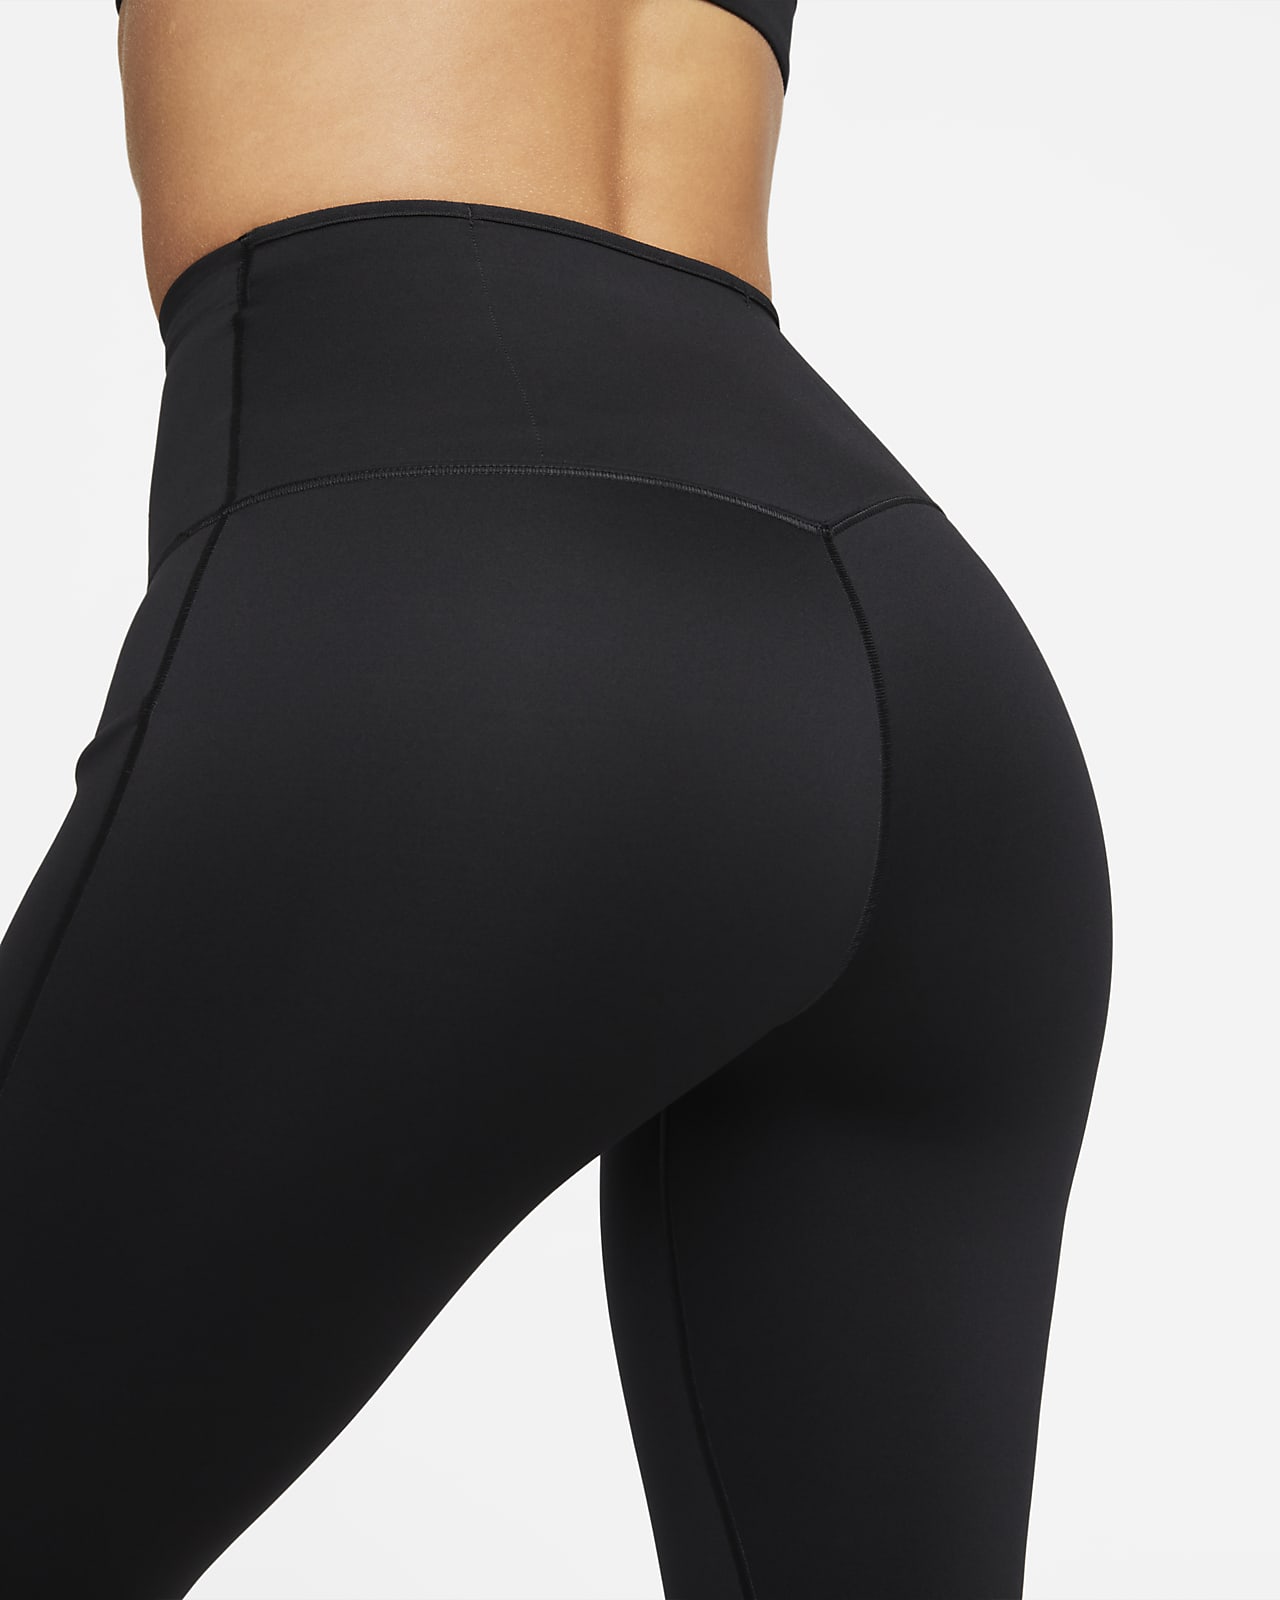 Nike Go Women's Firm-Support High-Waisted Capri Leggings with Pockets. Nike